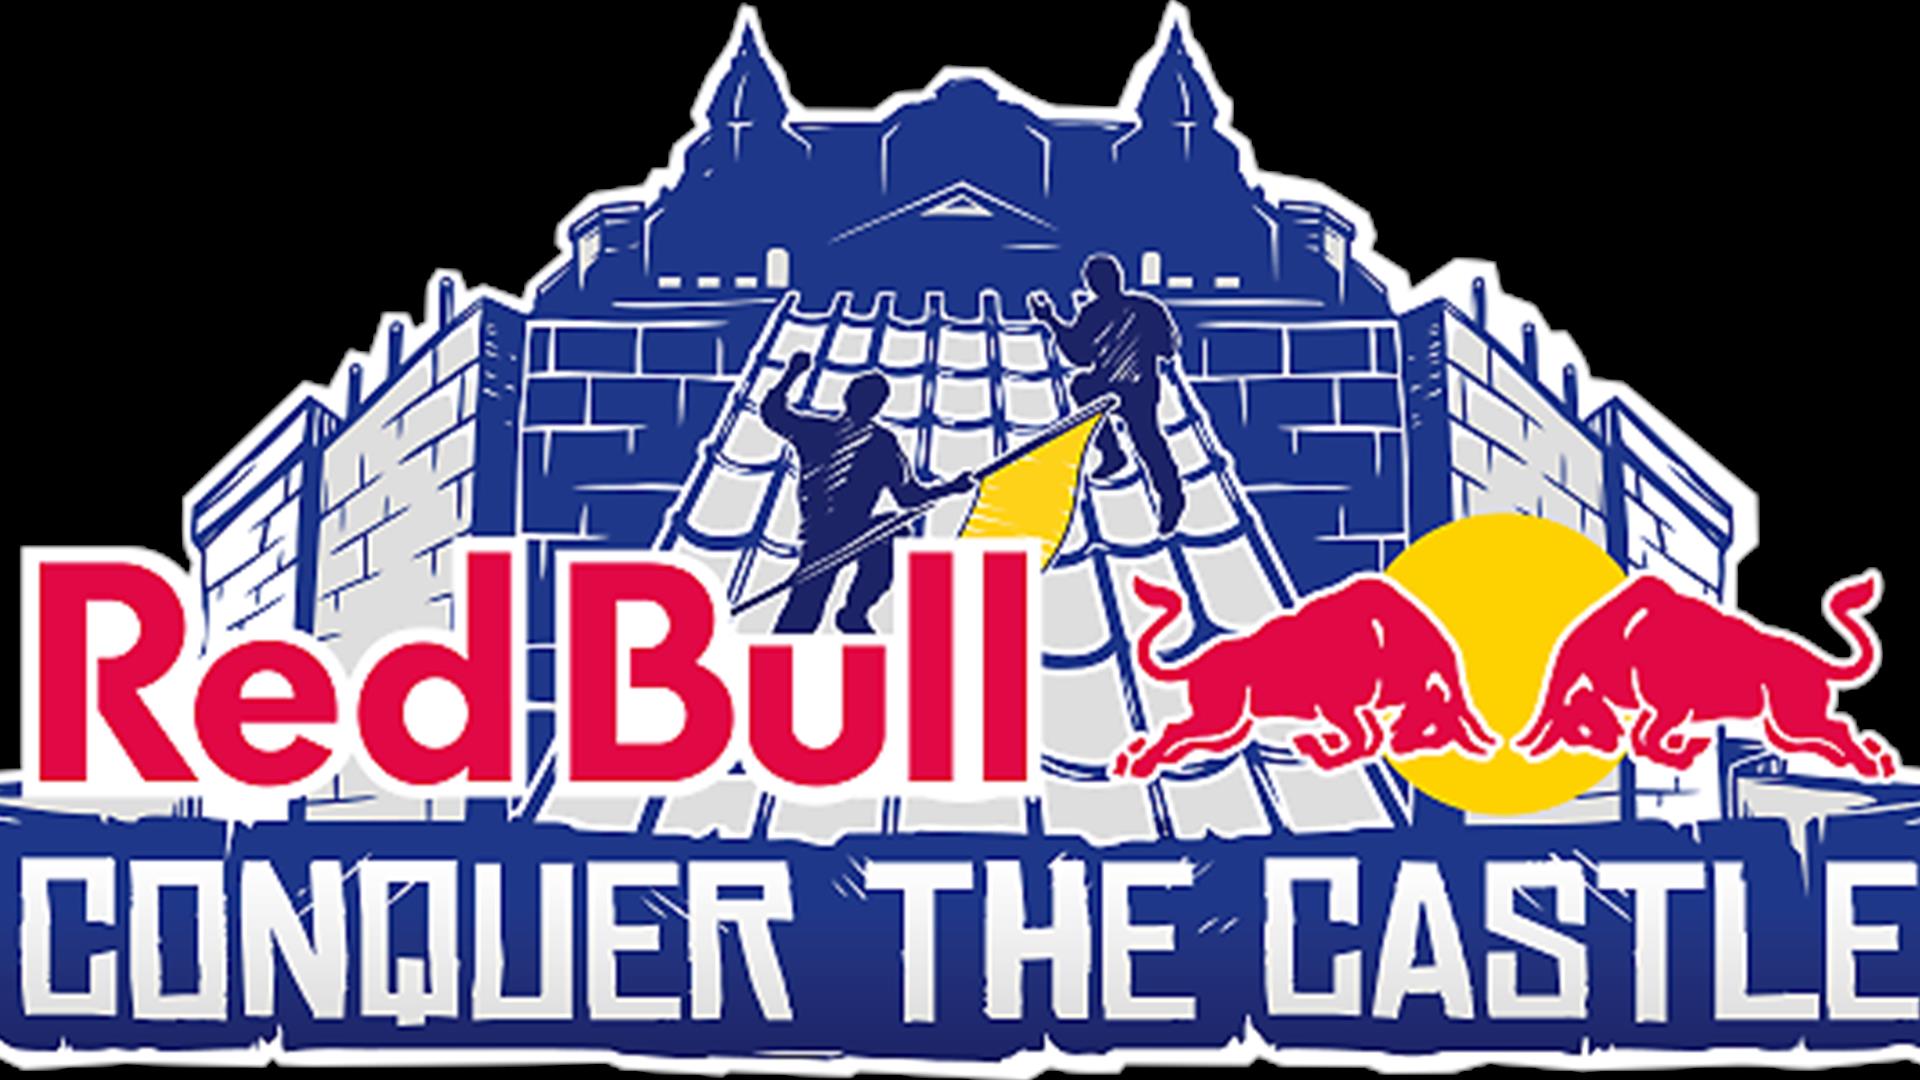 Red Bull Conquer The Castle Irvinestown Fermanagh Lakelands